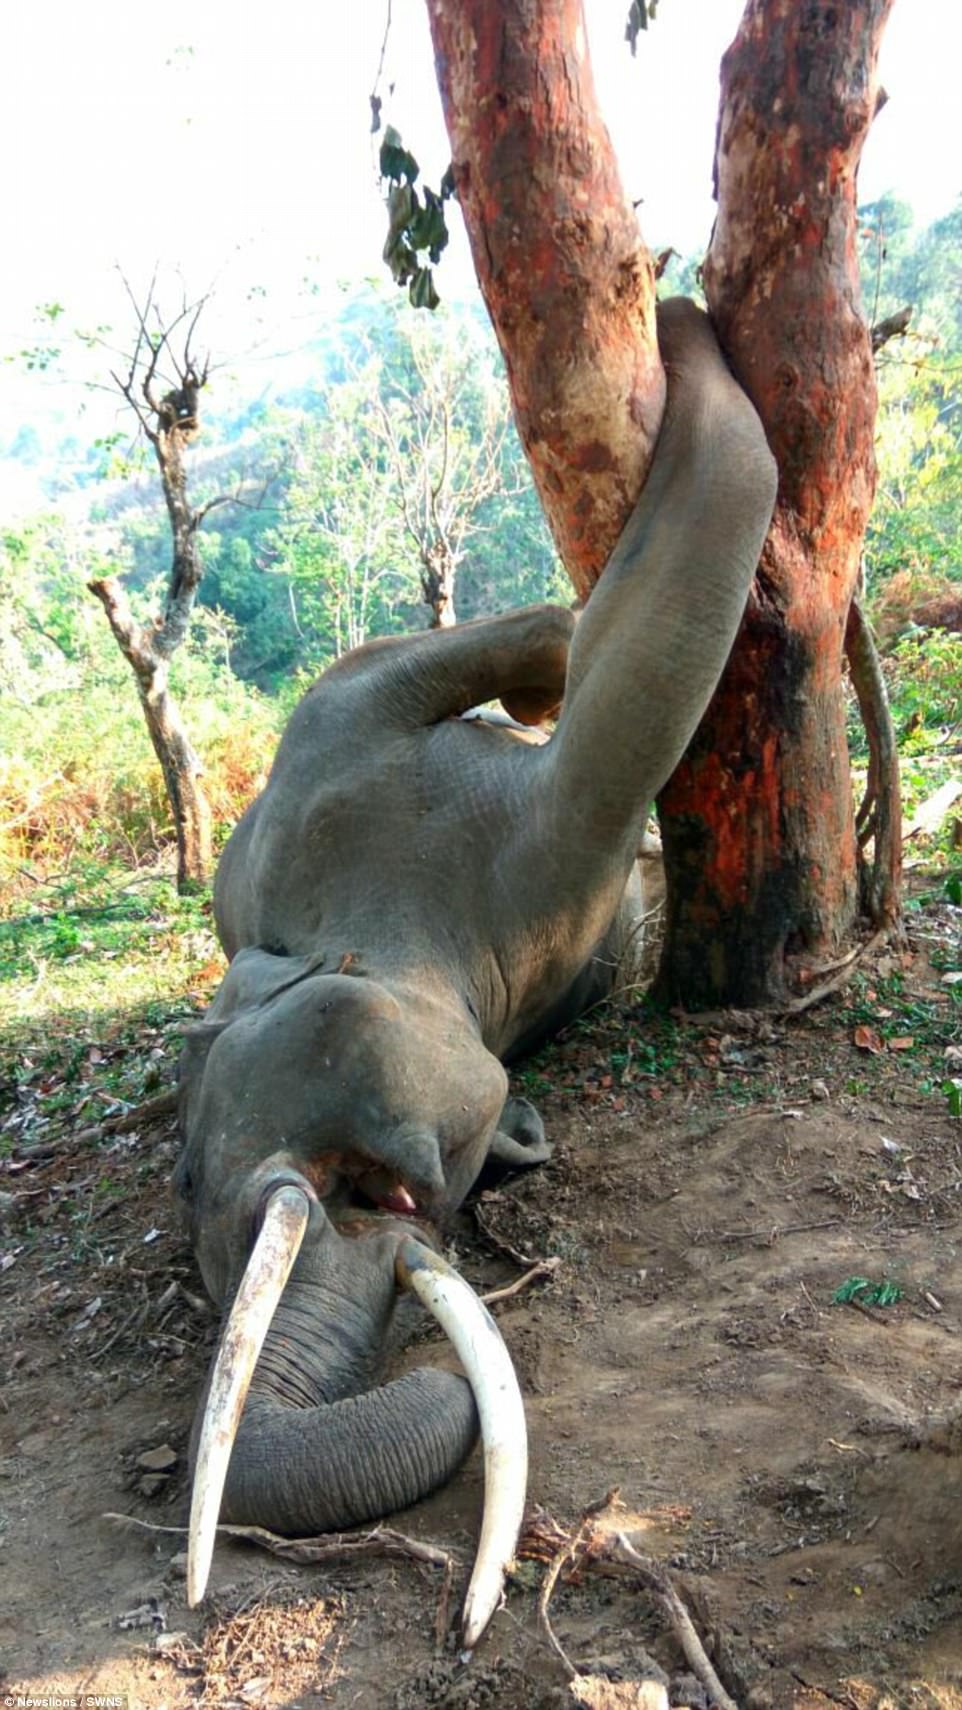 This tragic picture shows an elephant on the ground after getting its right leg entangled in a tree trunk